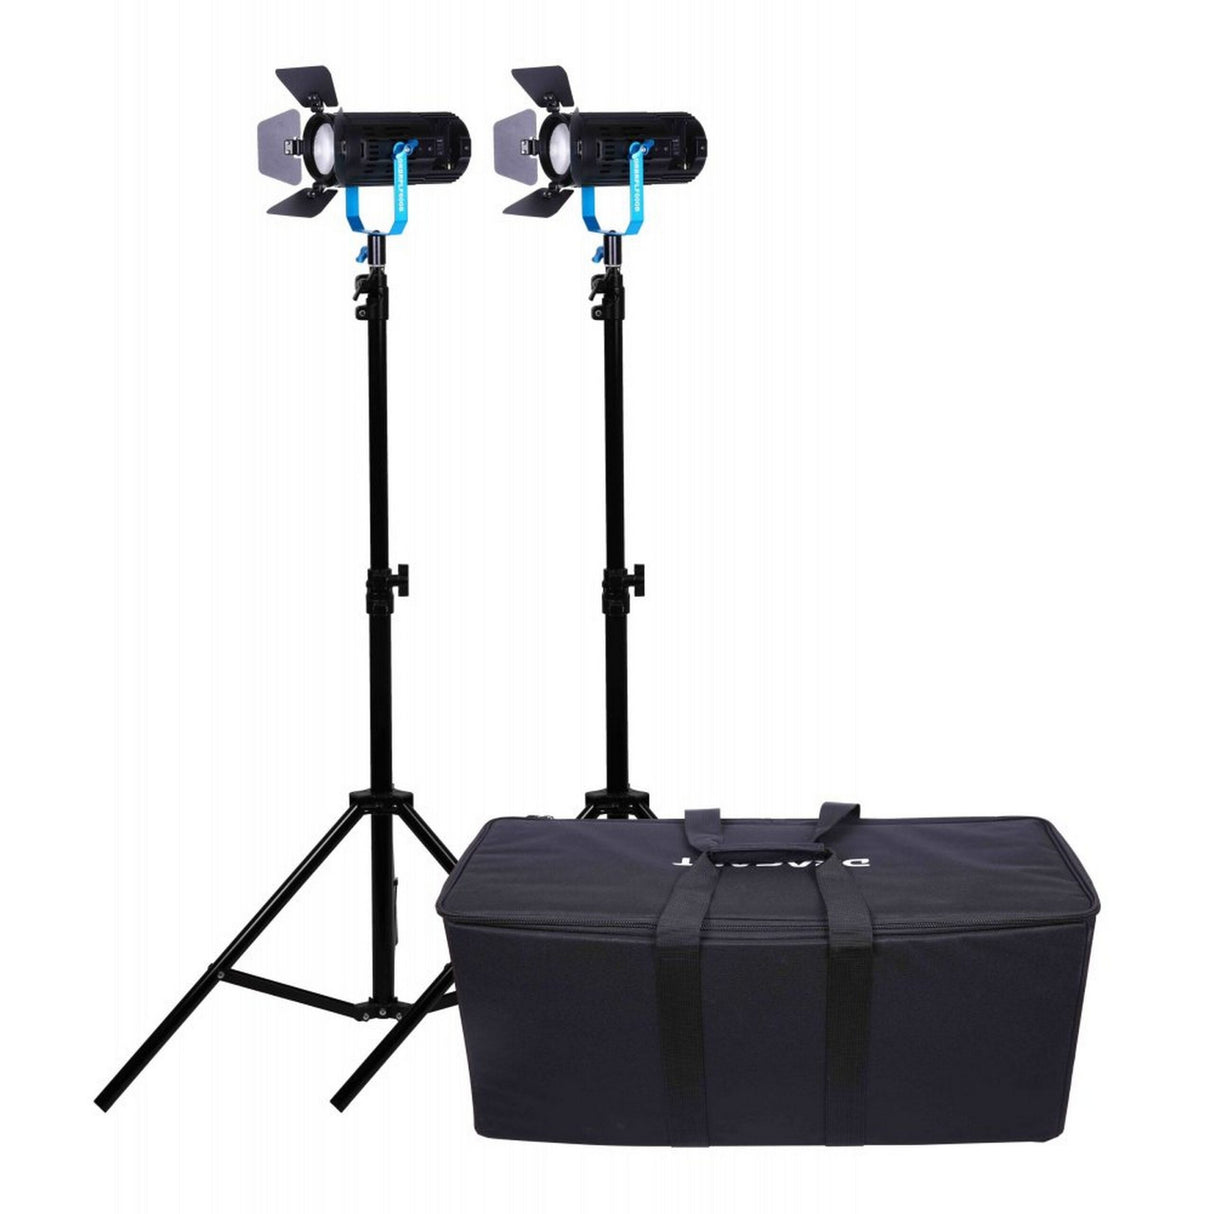 Dracast DRBR600B2LSK Boltray Plus 600 Bi-Color 2 Light Kit with Dual NP-F Battery Plates and Nylon Padded Travel Case